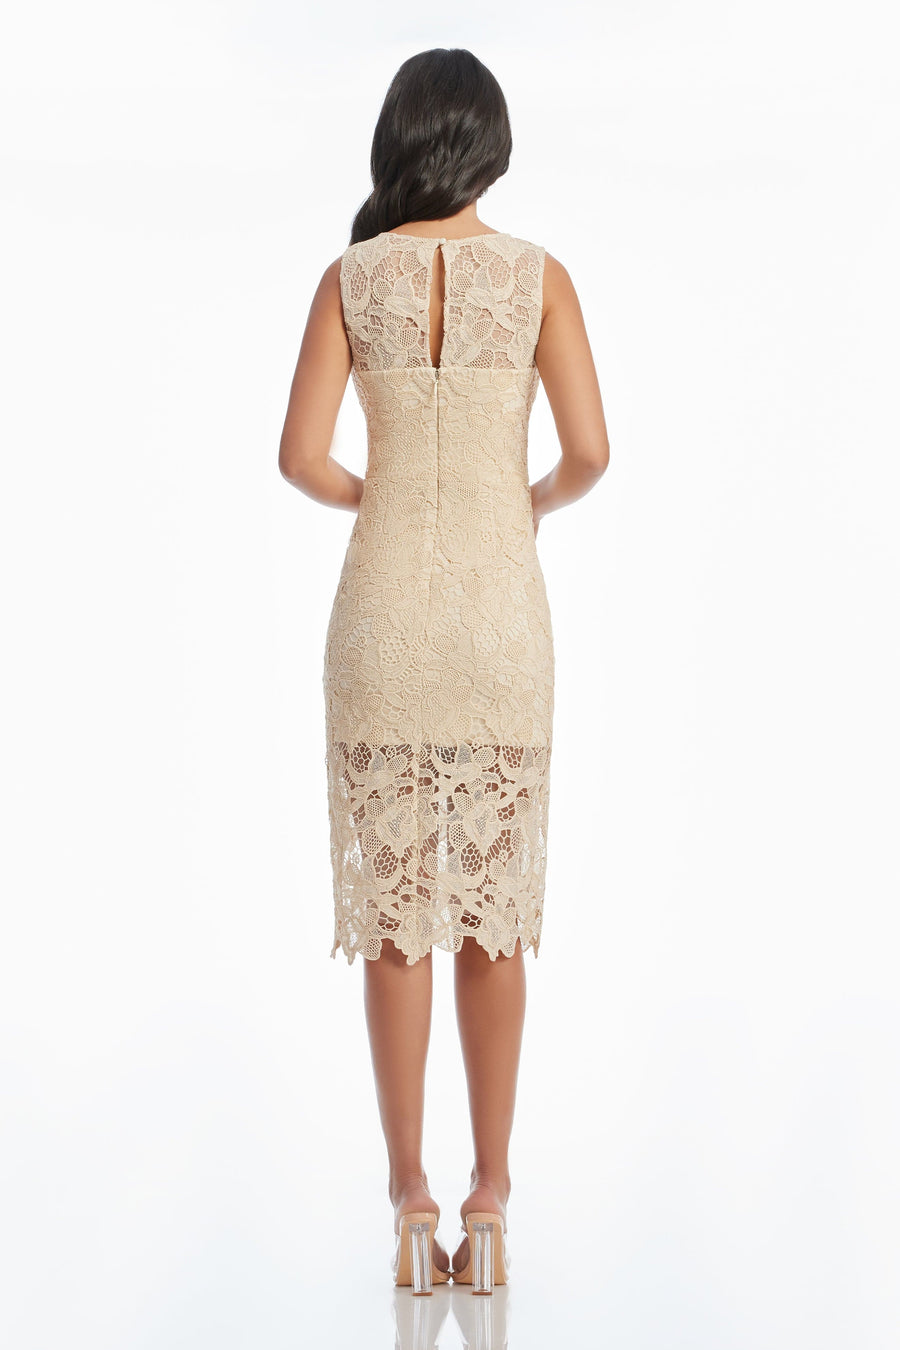 Kate Middleton's Cream Lace Alexander McQueen Dress | Glamour